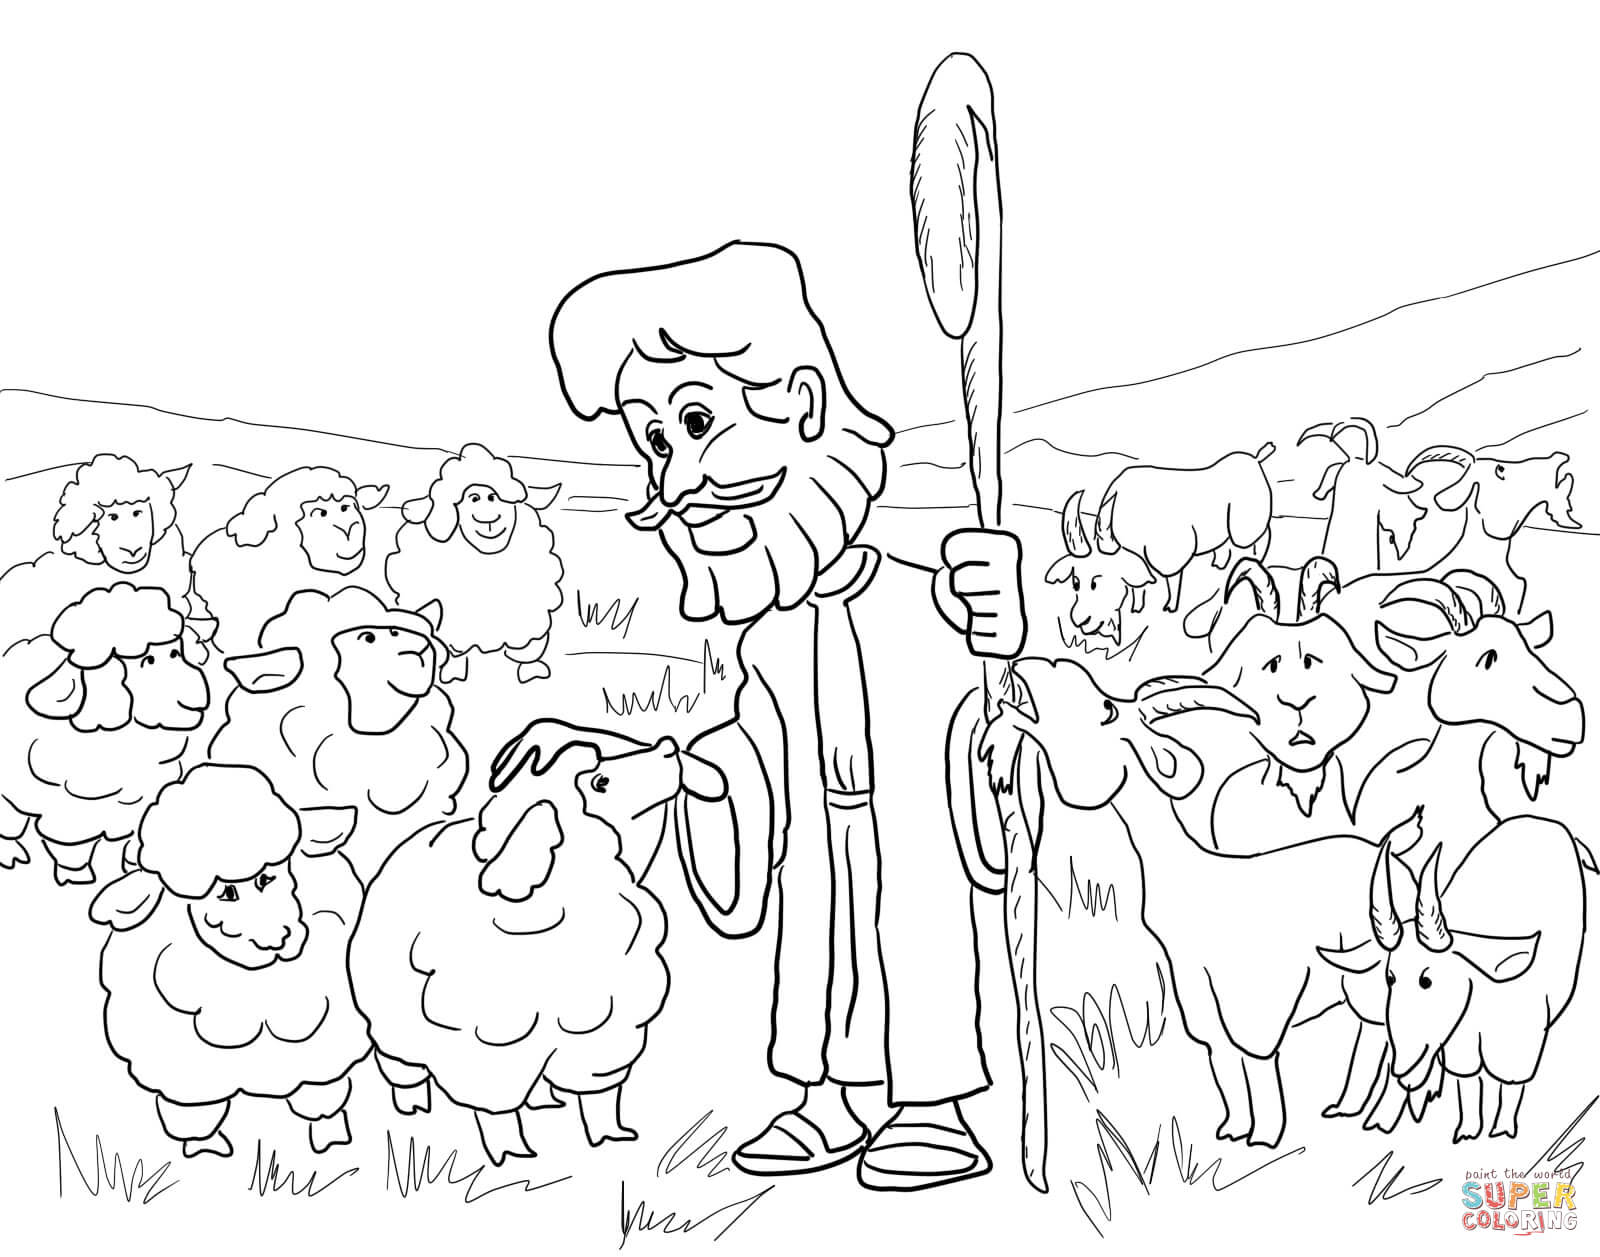 Parable of the Sheep and the Goats coloring page | Free Printable ...